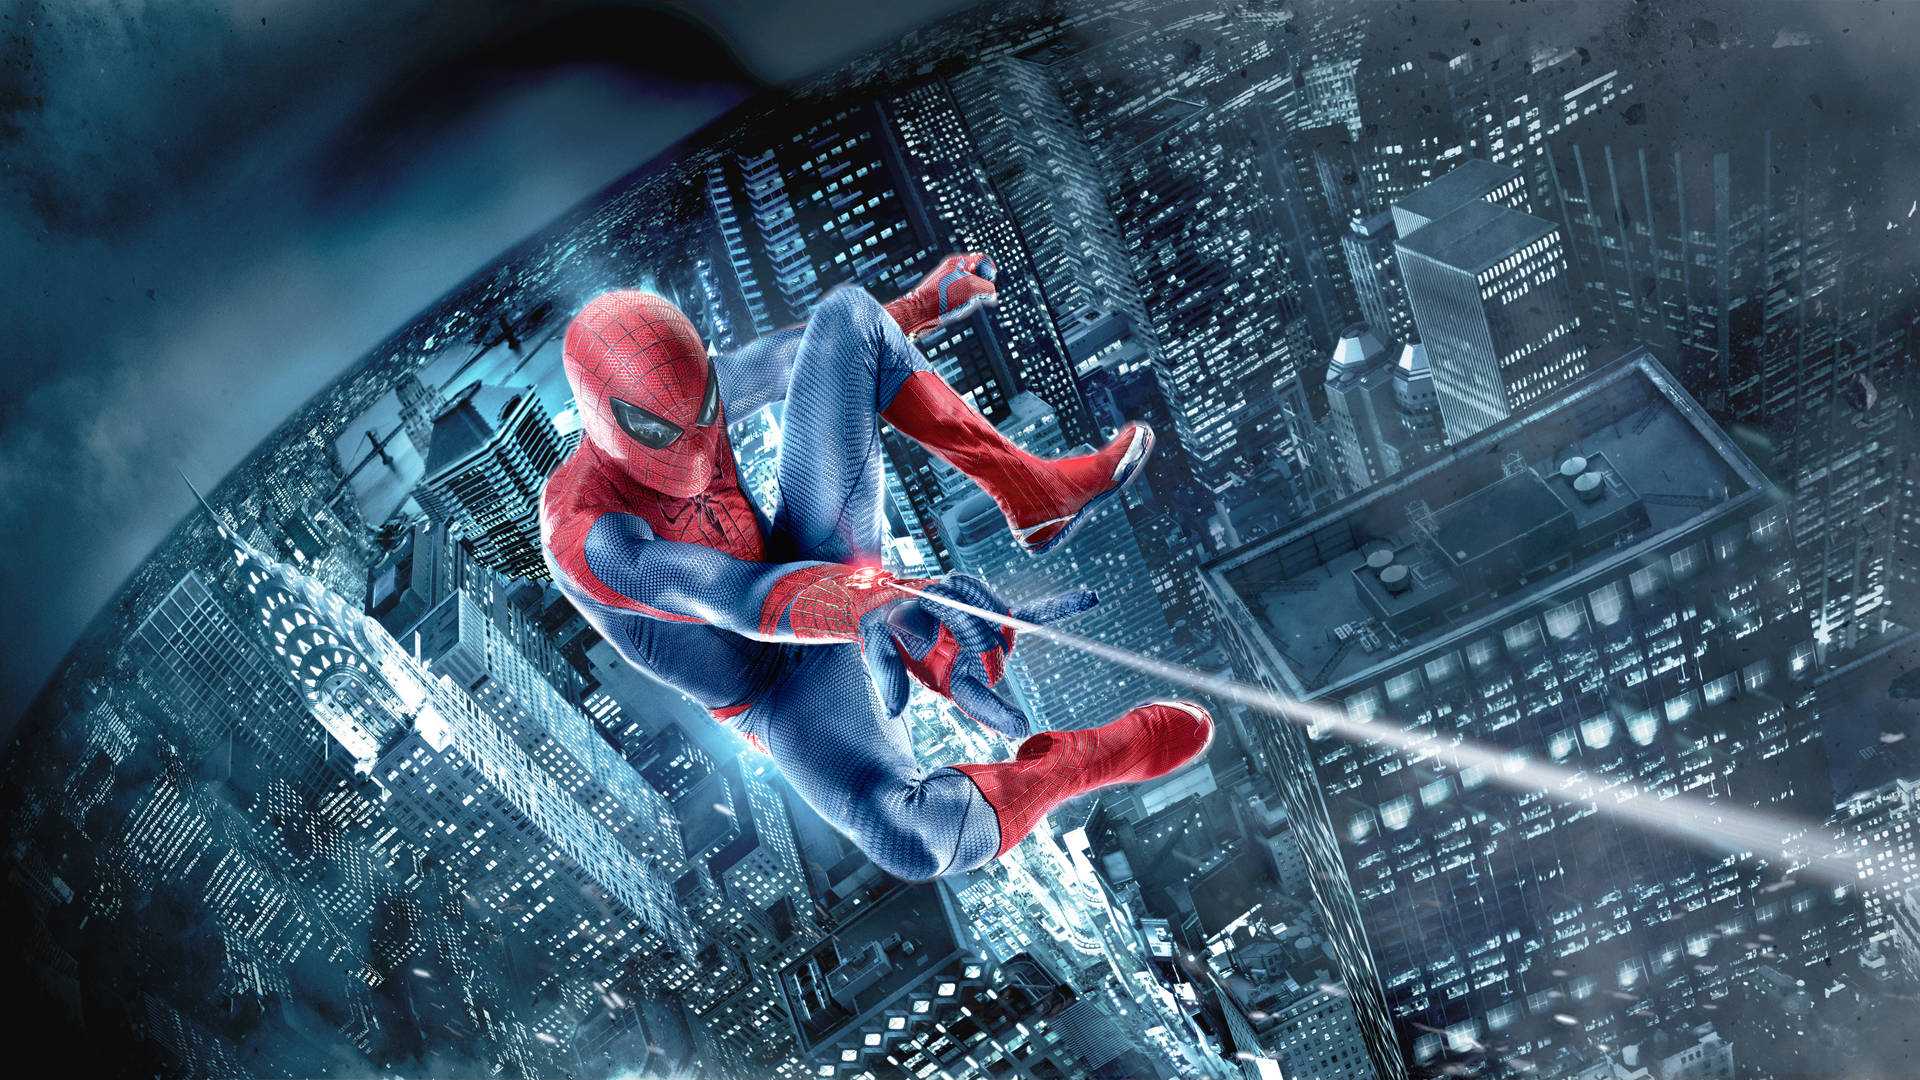 Peter Parker transforming into The Amazing Spider-Man. Wallpaper